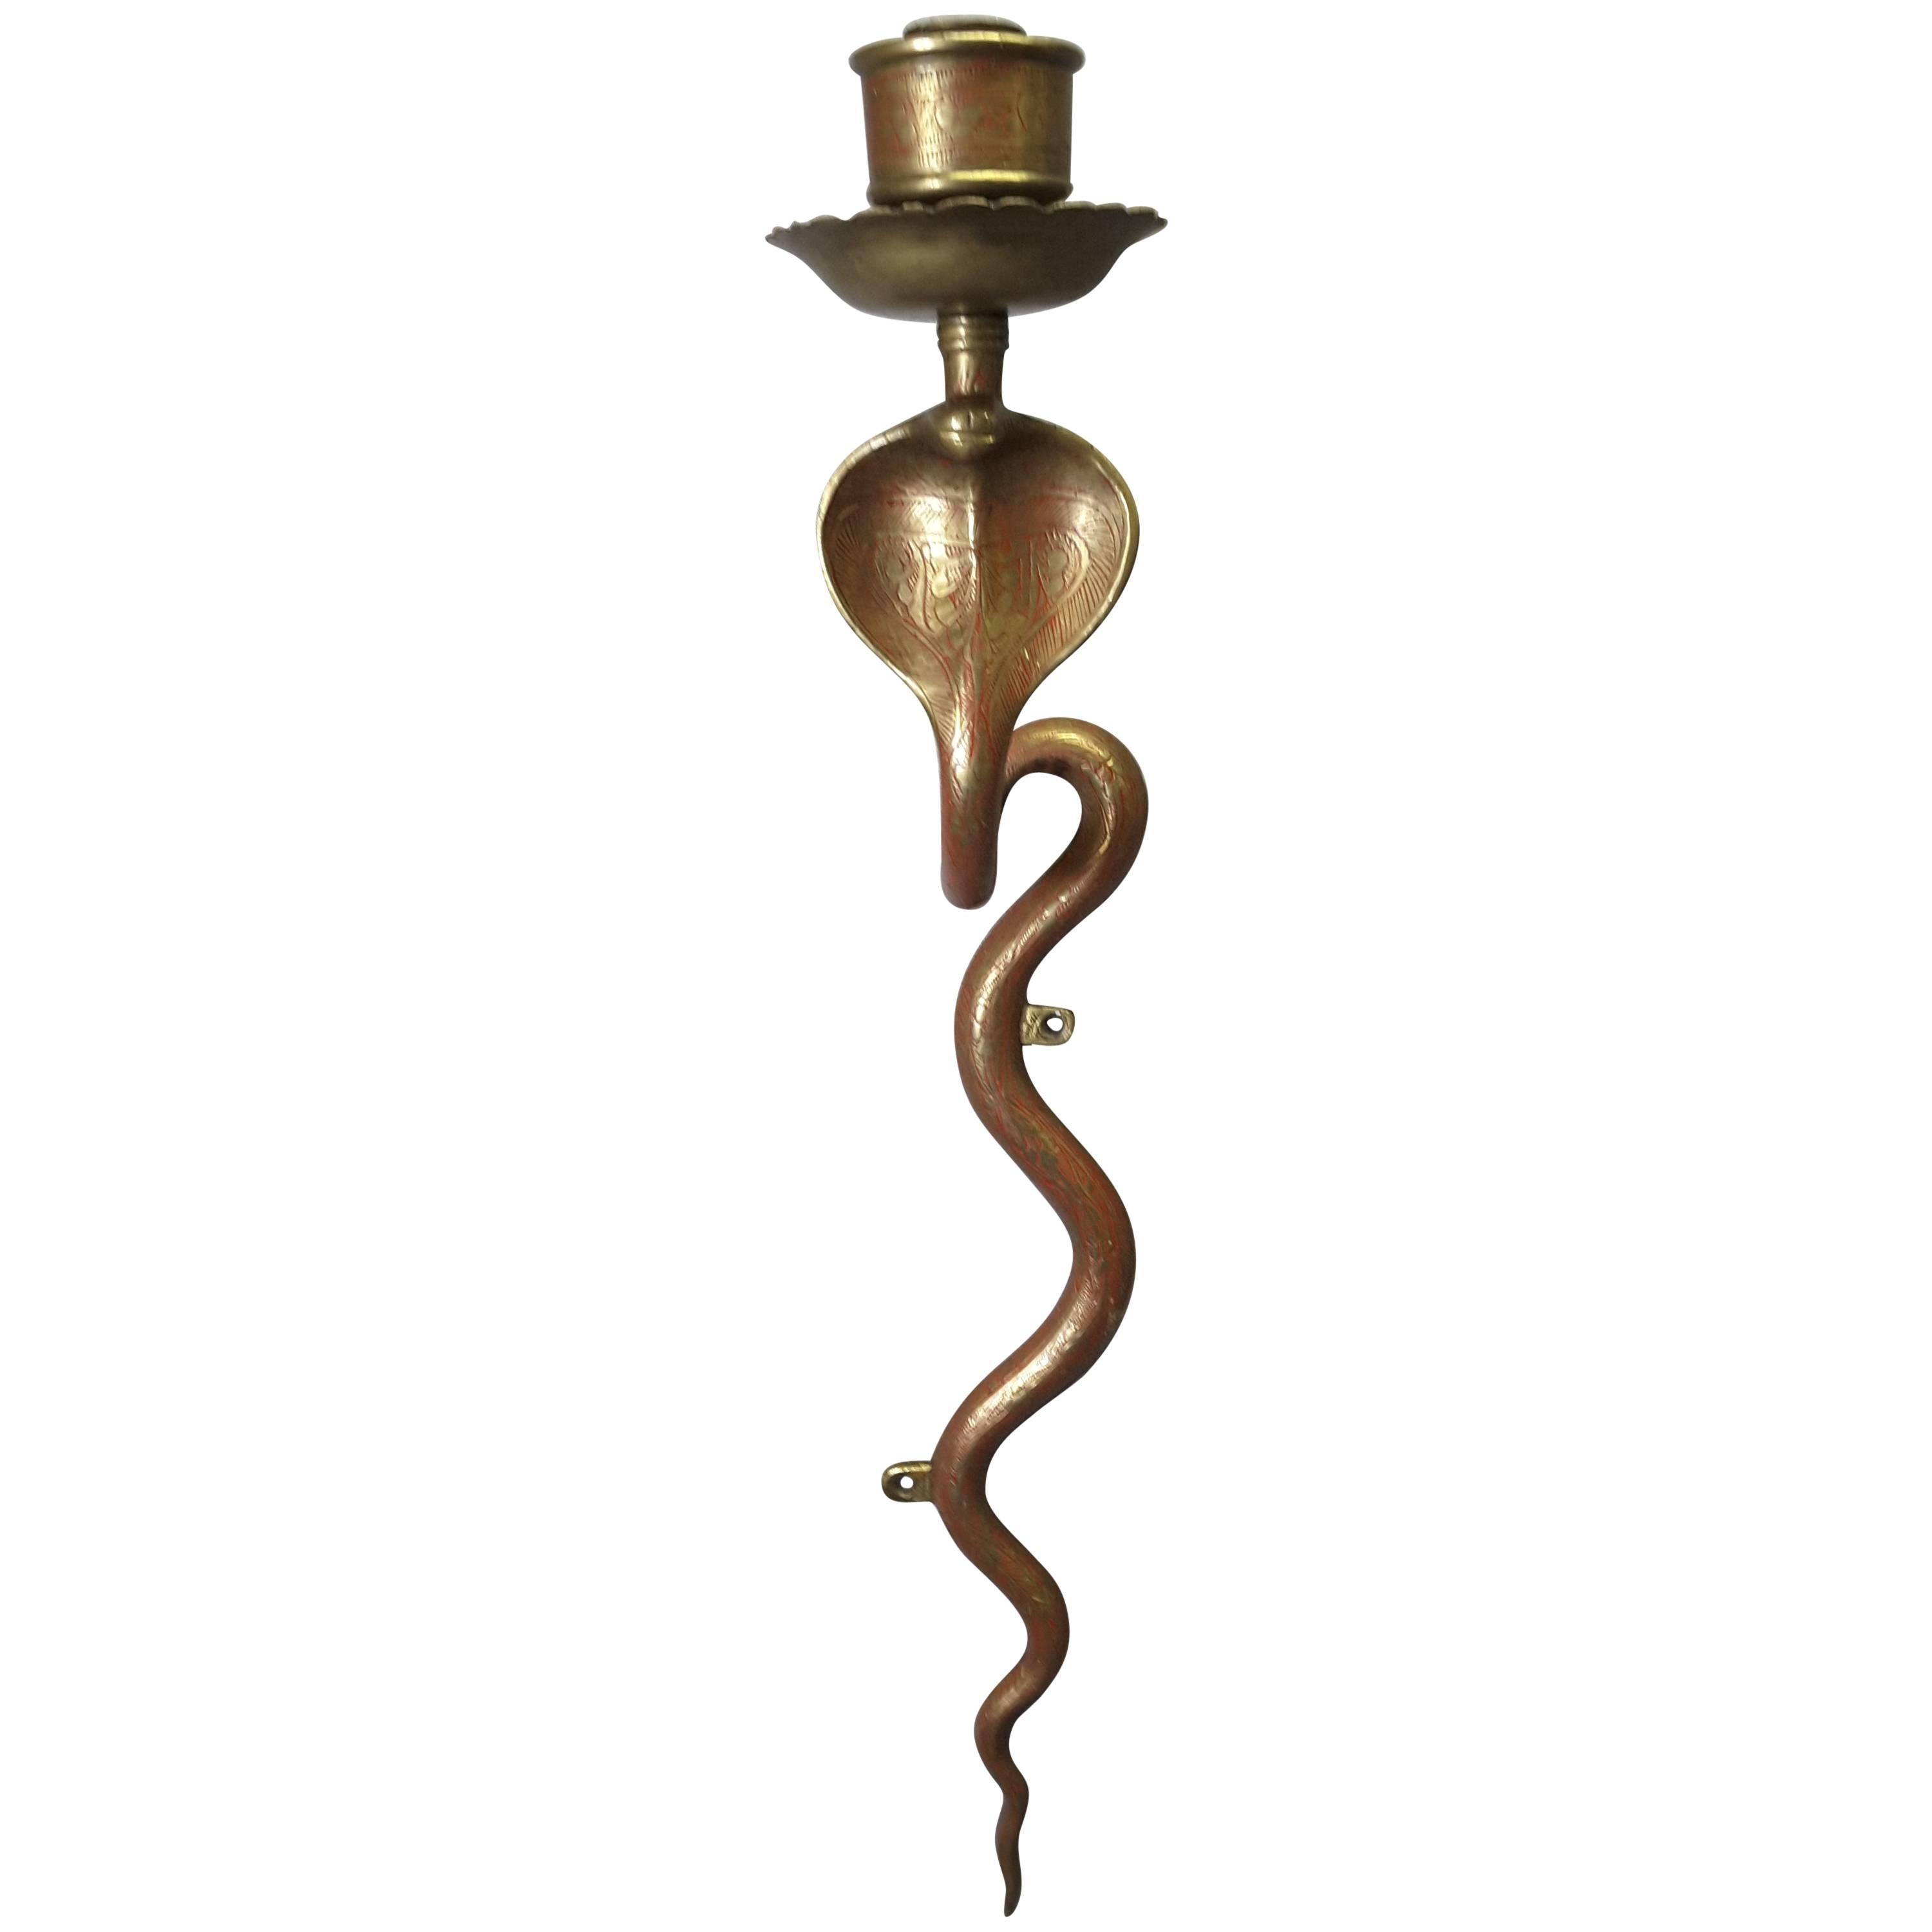 Brass Cobra Sconce Engraved Decoration with Red Detailing, circa 1960s